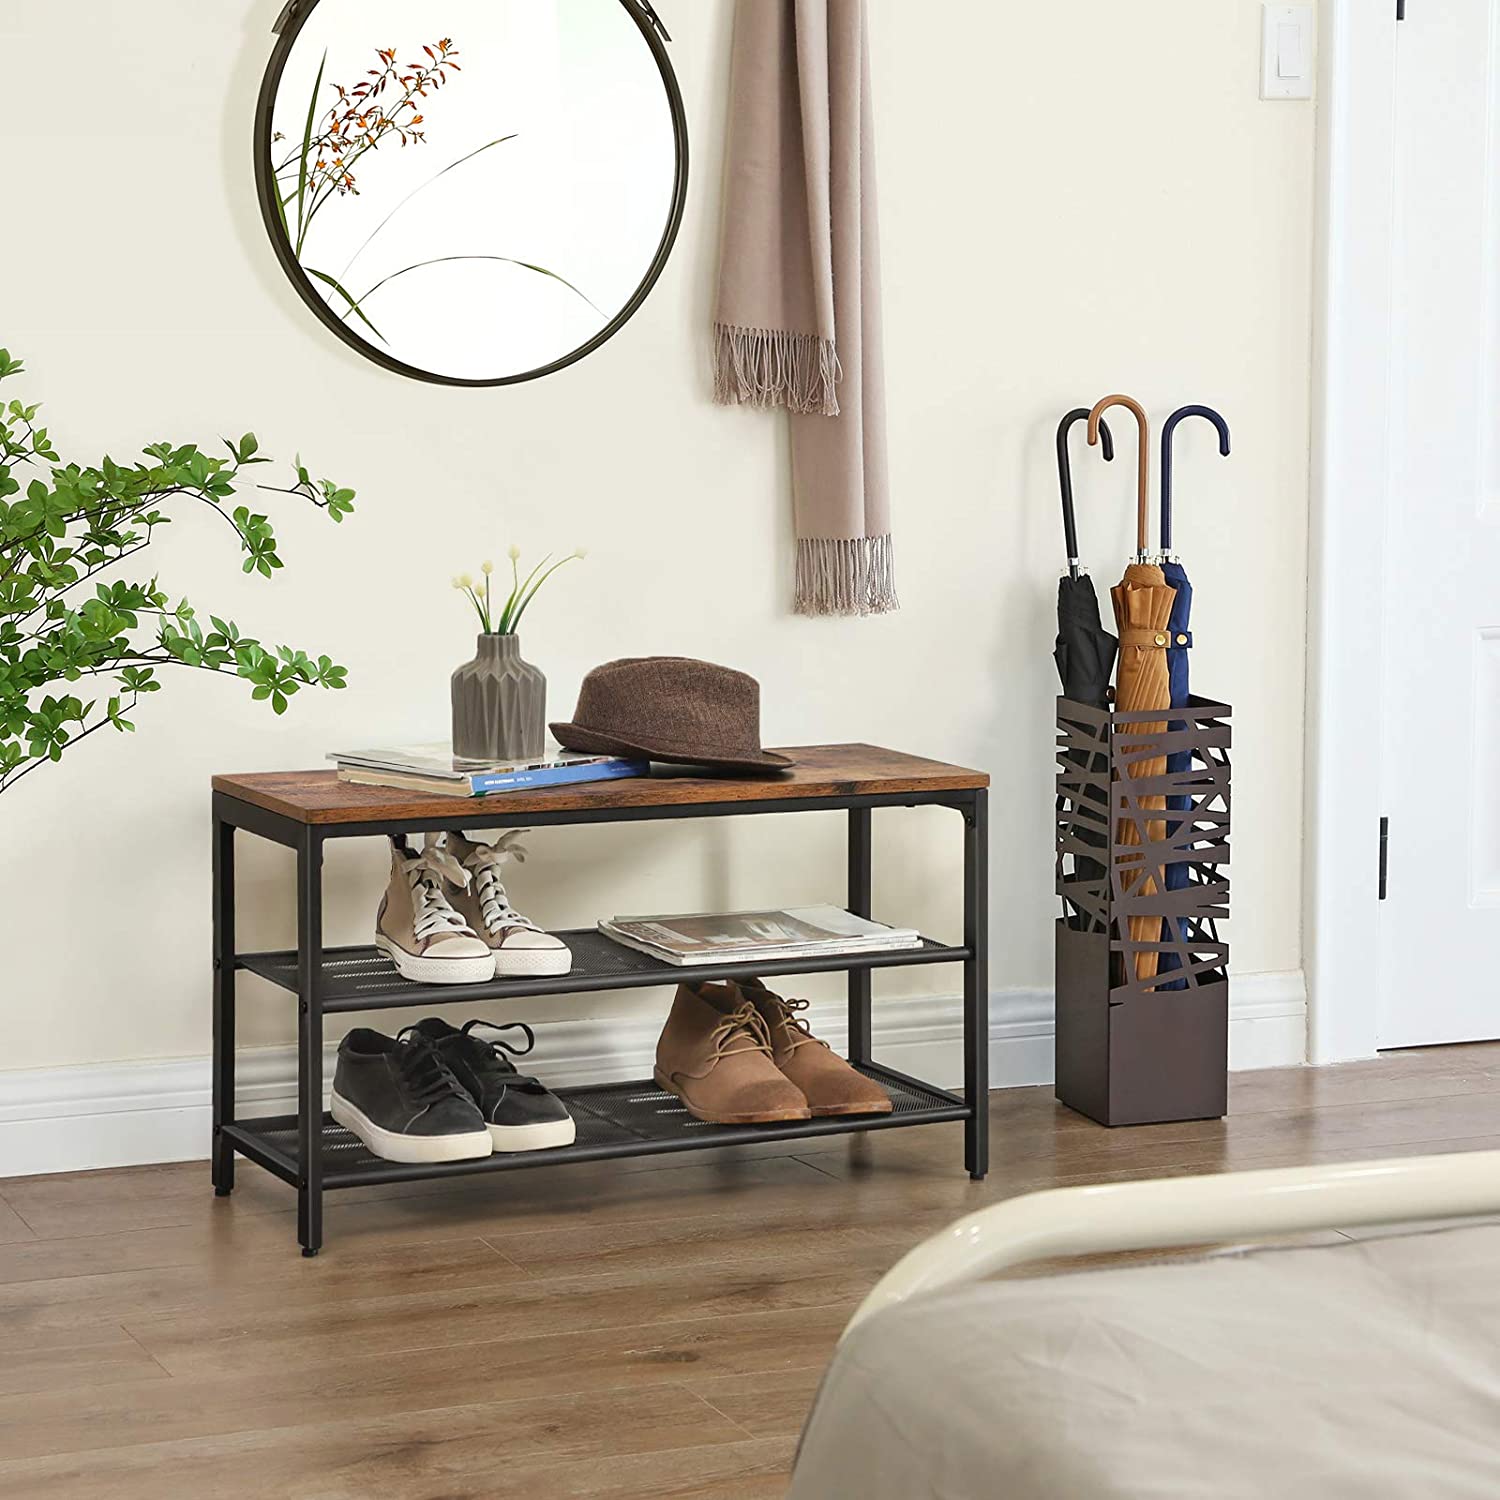 Shoe Rack with 2 Mesh Shelves, Rustic Brown and Black - image2